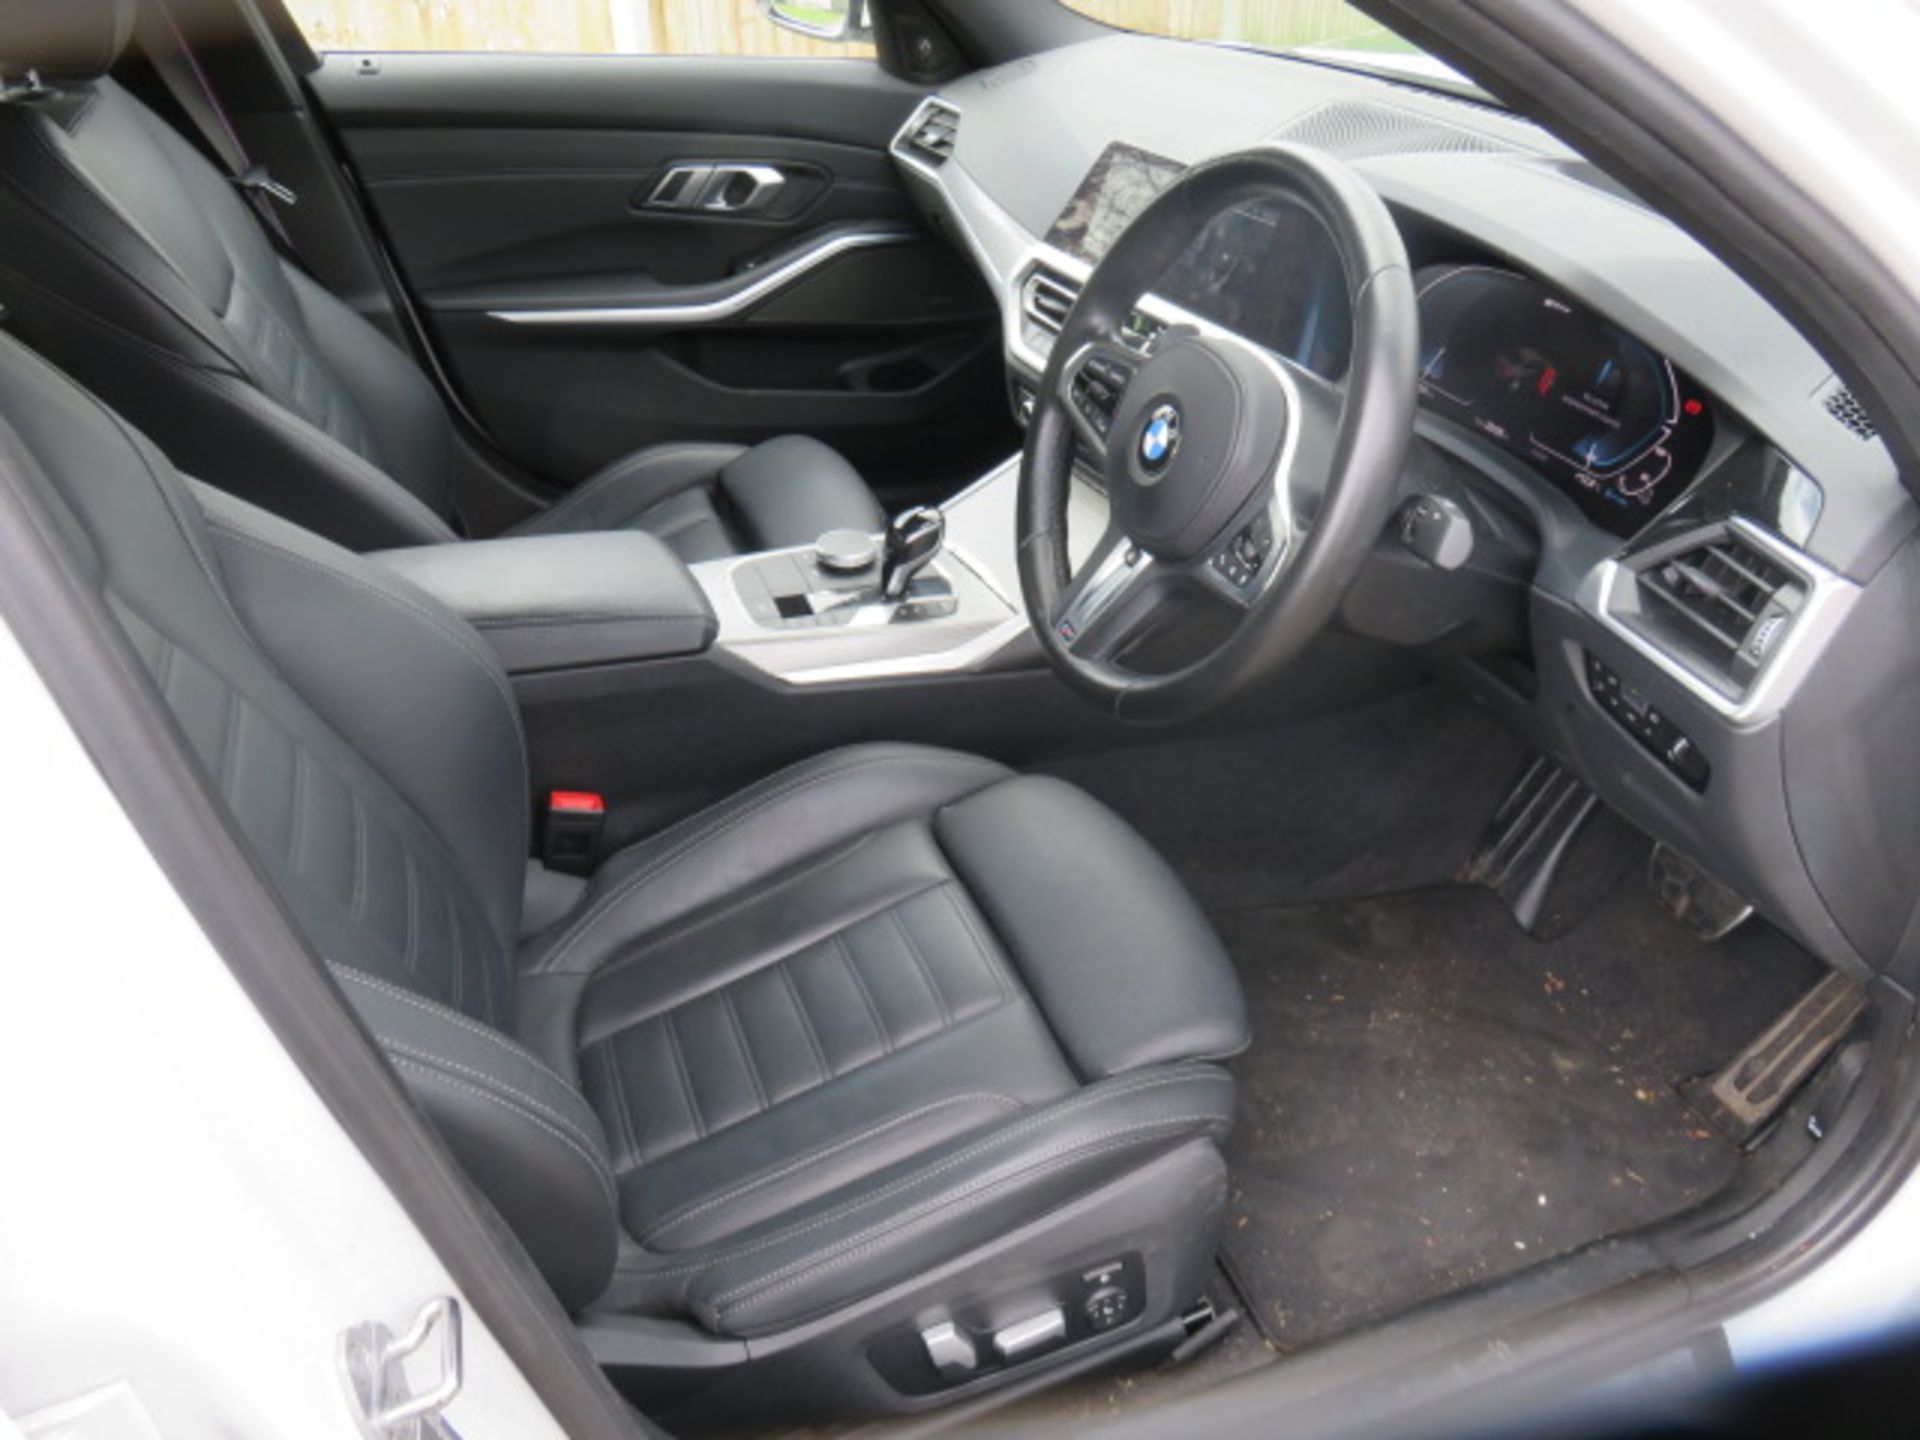 1 BMW 330e M Sport Auto 2.0 Hydrid Electric Four Door Saloon. - Image 12 of 16